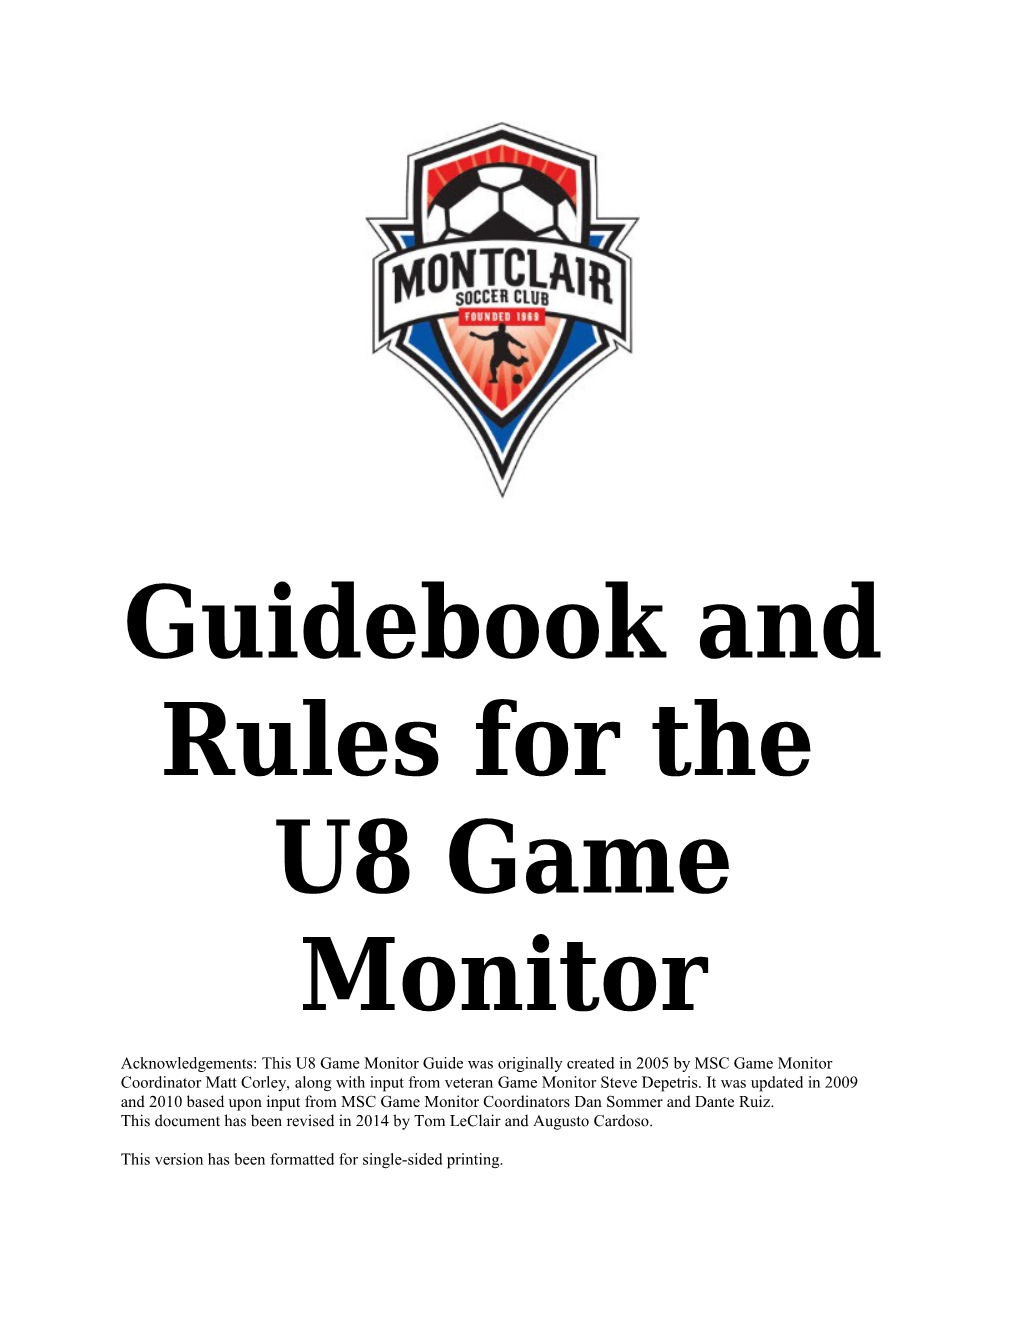 Guidebook and Rules for The